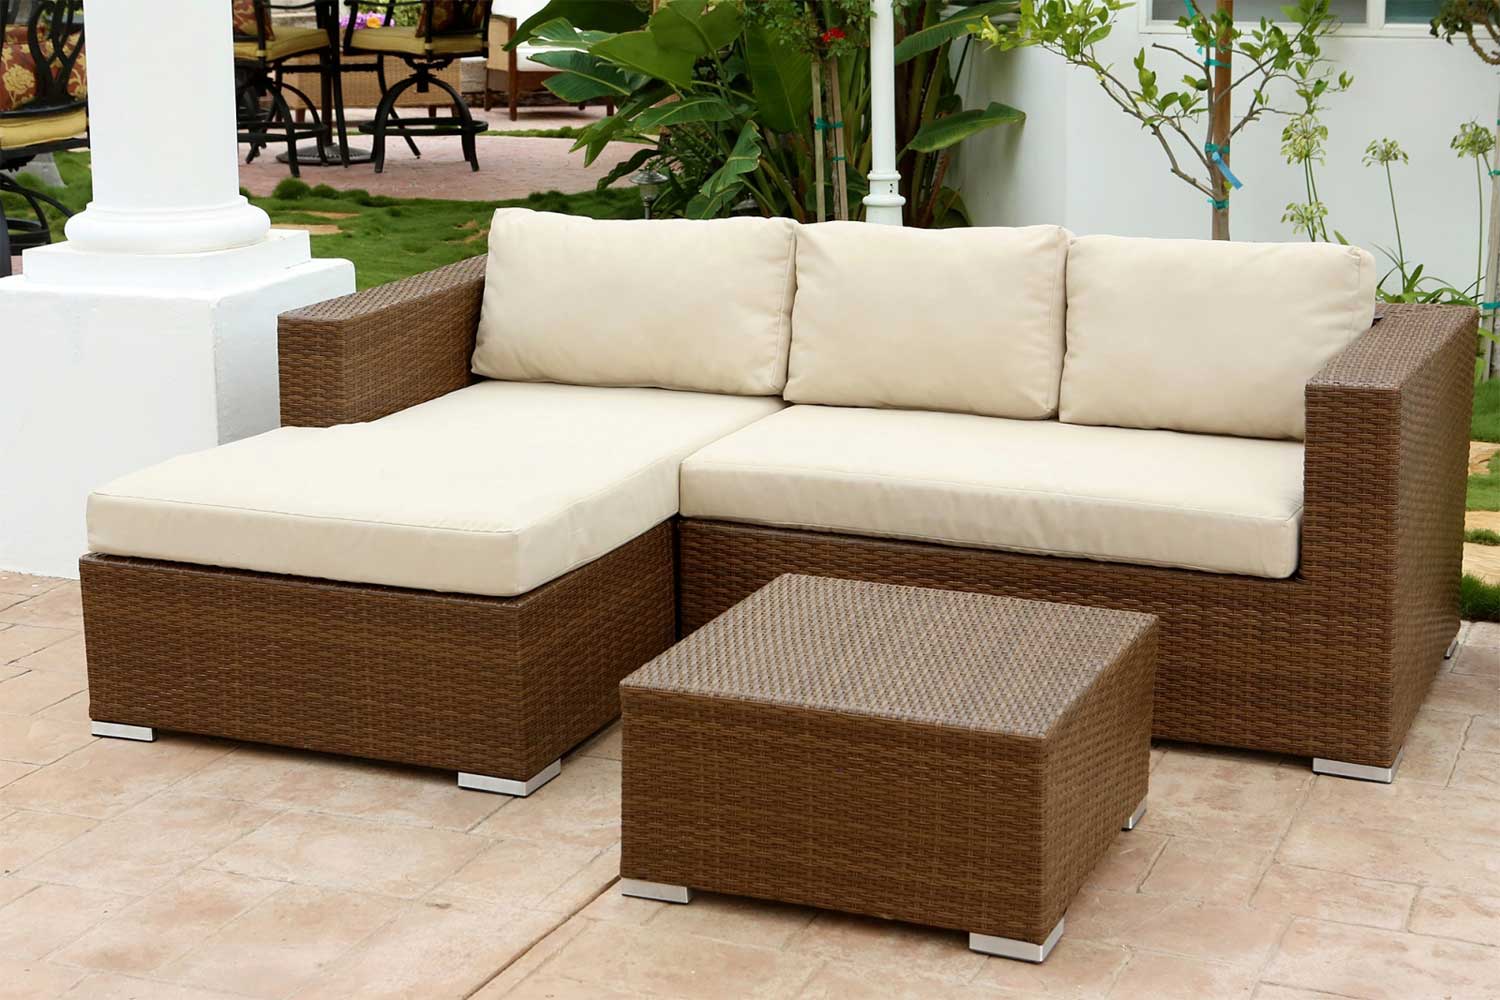 Abbyson Living Palermo Outdoor Wicker Sectional Sofa and Table Set - Dark Brown